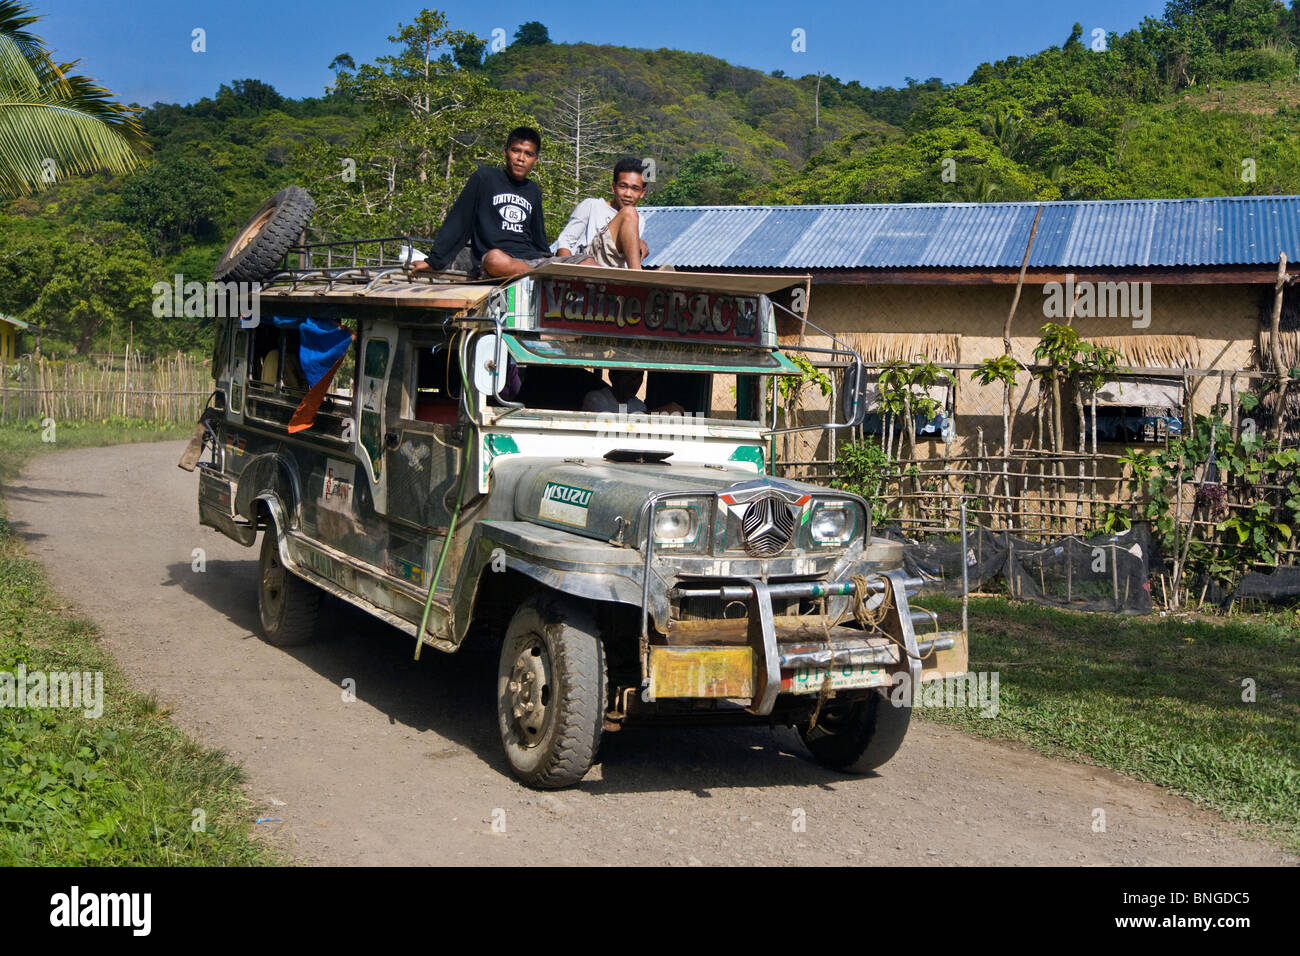 A JEEPNEY is used for transportation in a small fishing village north of EL NIDO - PALAWAN ISLAND, PHILIPPINES Stock Photo